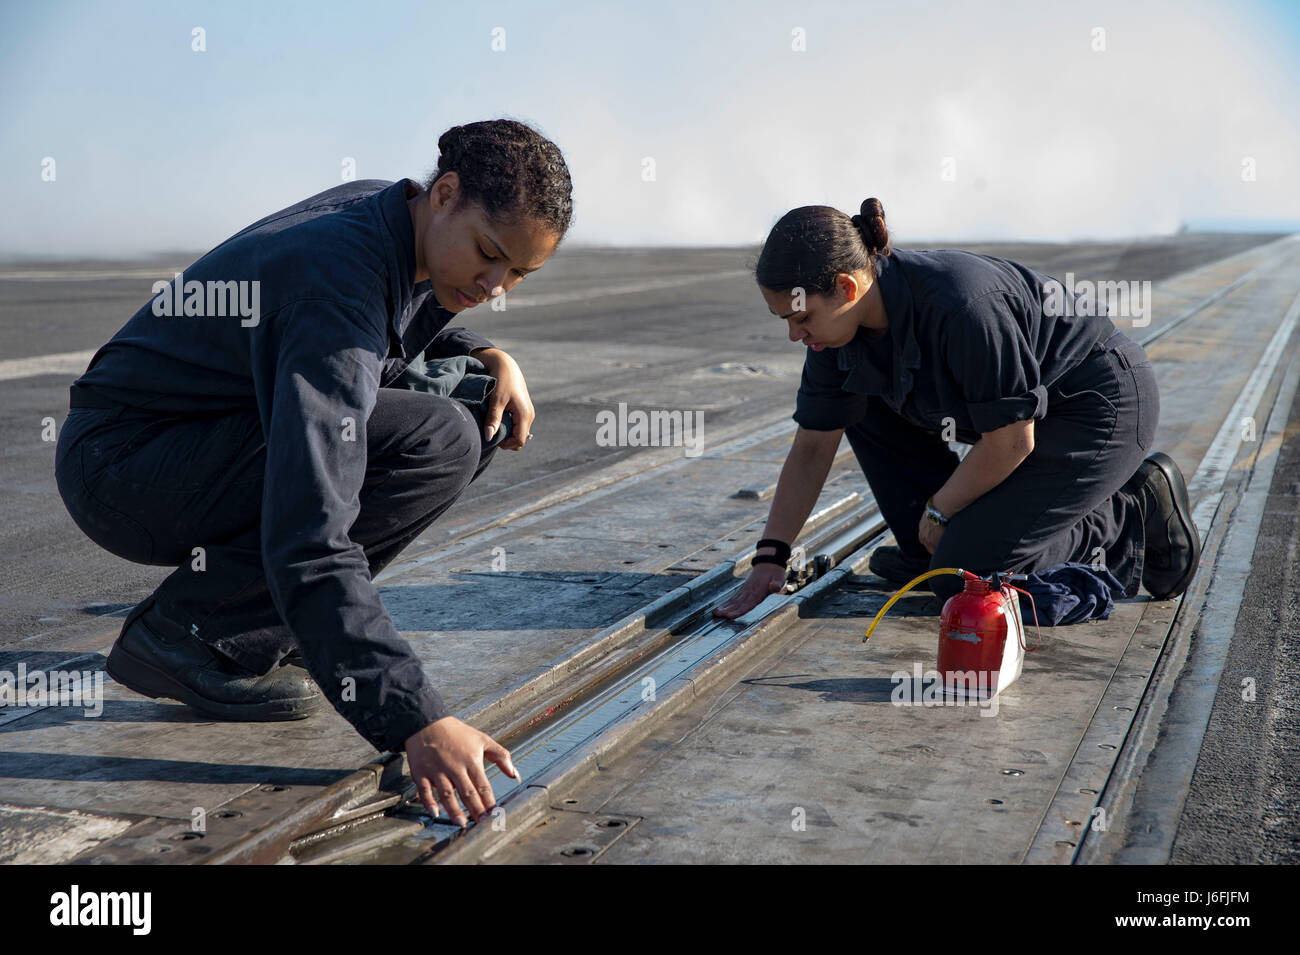 170517-N-QN175-029  ATLANTIC OCEAN (May 17, 2017) Aviation Boatswain's Mate (Equipment) Airman Kelli Williams, from Columbia, Md., left, and Aviation Boatswain's Mate (Equipment) Airman Alyessa Ramos, from Brooklyn, N.Y., right, lubricate nose gear during preservation procedures on the flight deck of the aircraft carrier USS Dwight D. Eisenhower (CVN 69) (Ike). Ike is currently underway conducting engineering drills as part of the sustainment phase of the Optimized Fleet Response Plan (OFRP). (U.S. Navy photo by Mass Communication Specialist 3rd Class Dartez C. Williams) Stock Photo